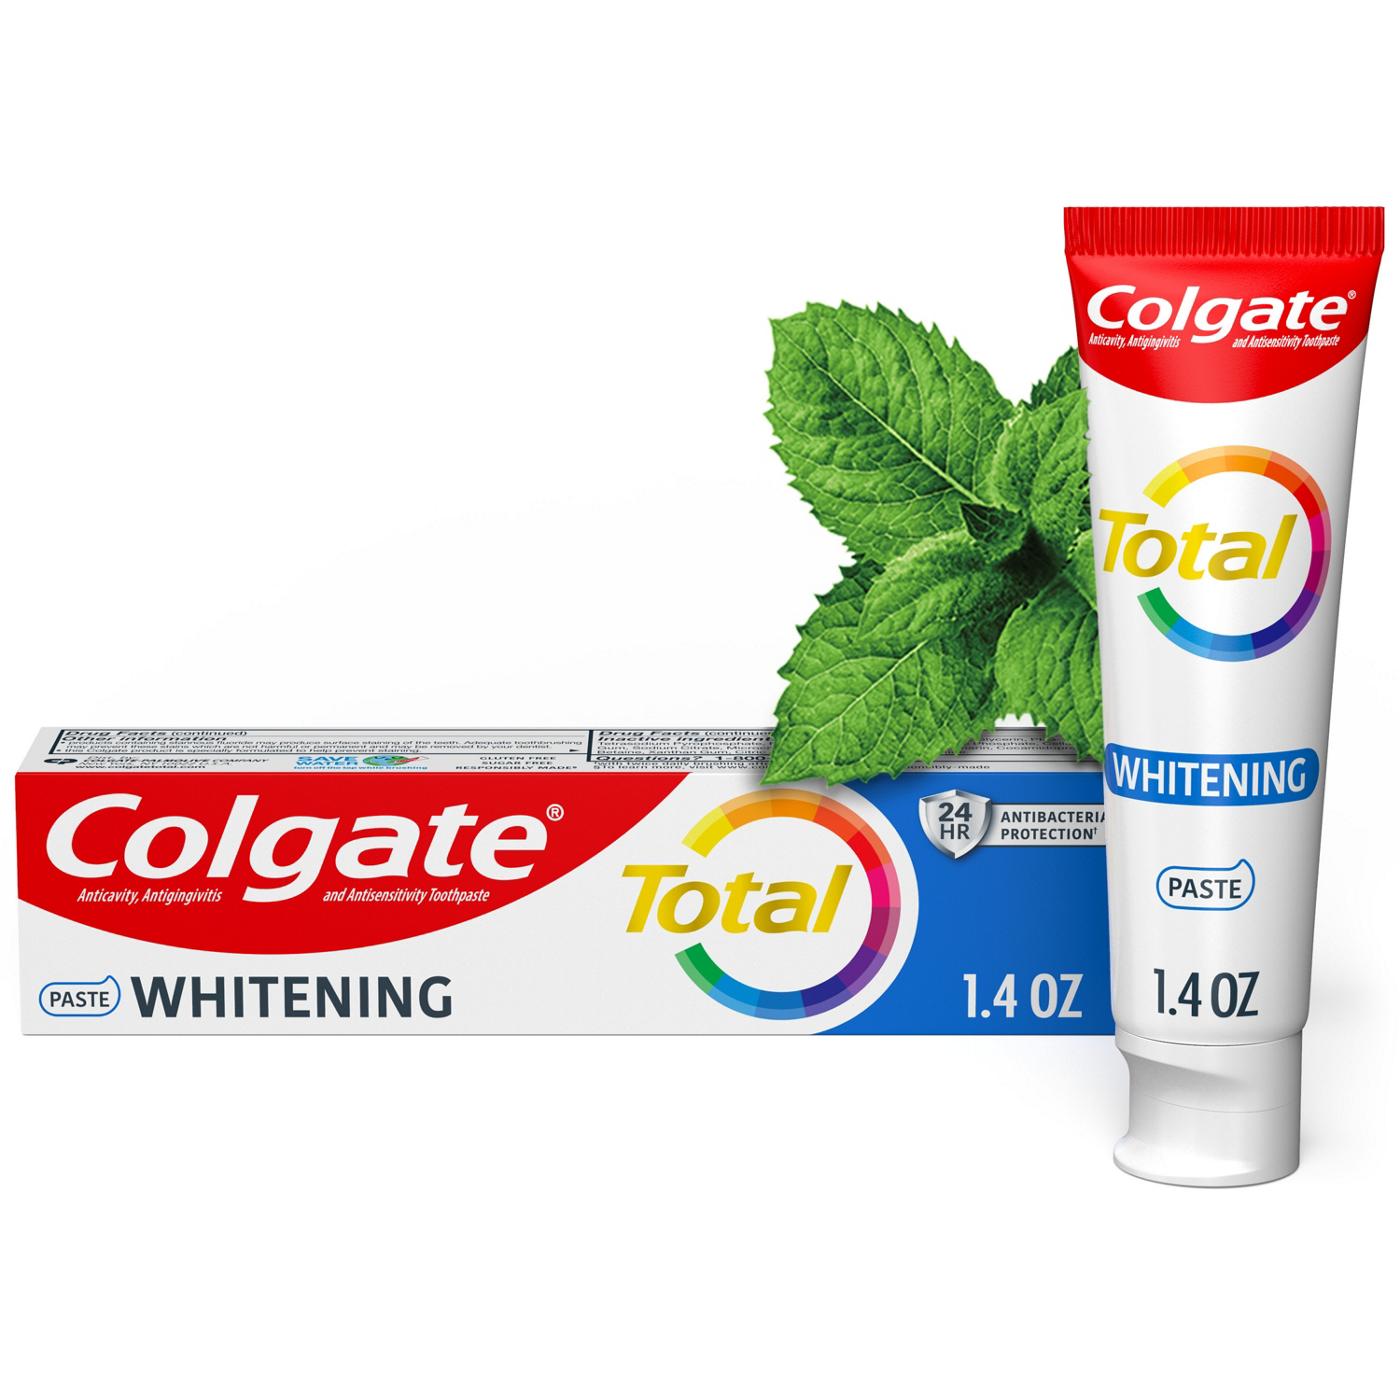 Colgate Total Whitening Toothpaste; image 9 of 10